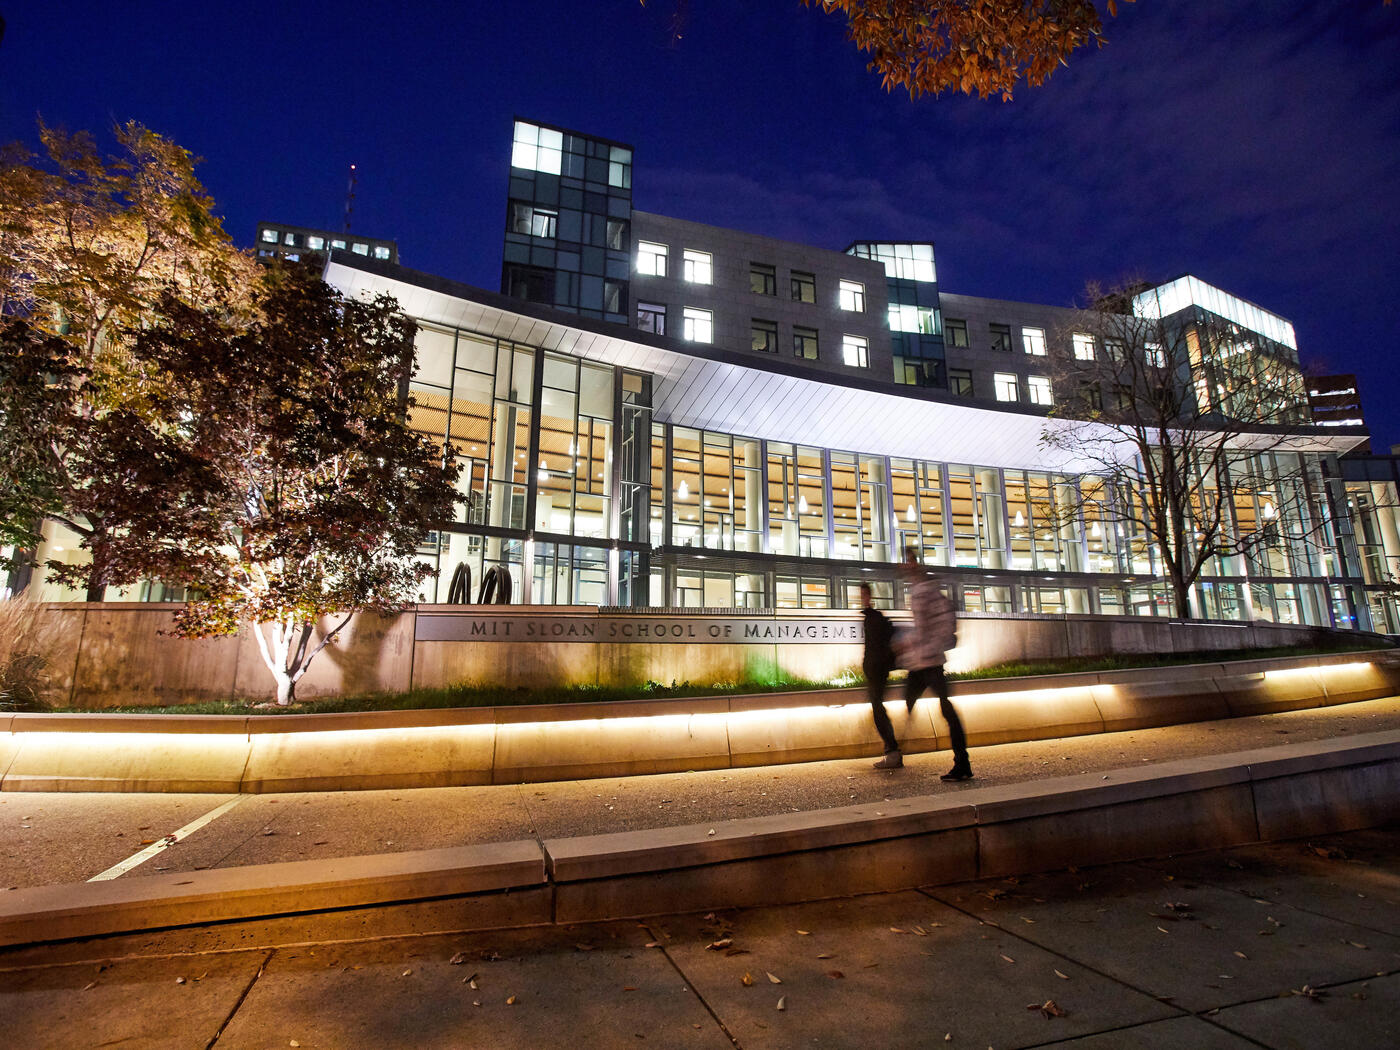 MIT Sloan E2 building campus at night